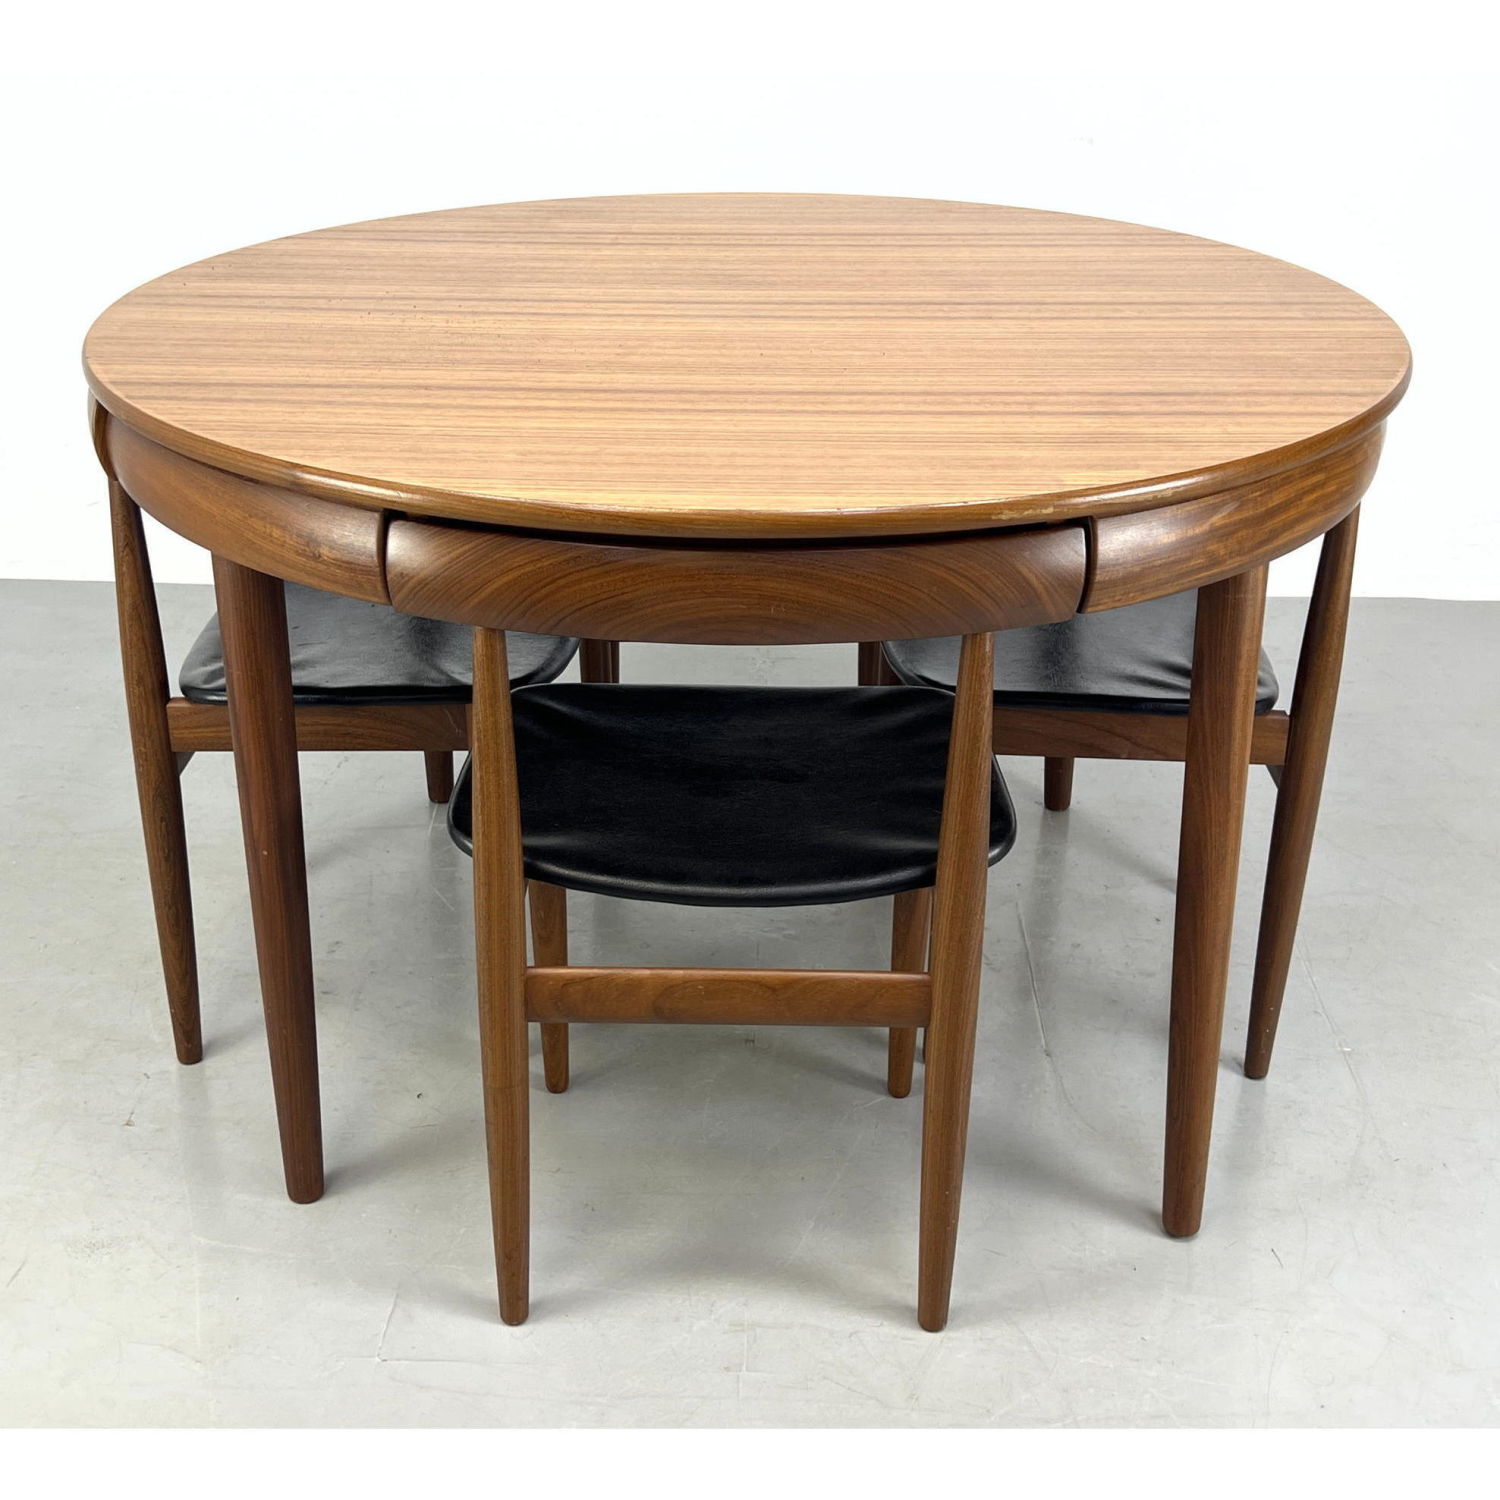 FREM ROJLE Dining Table and Chairs.